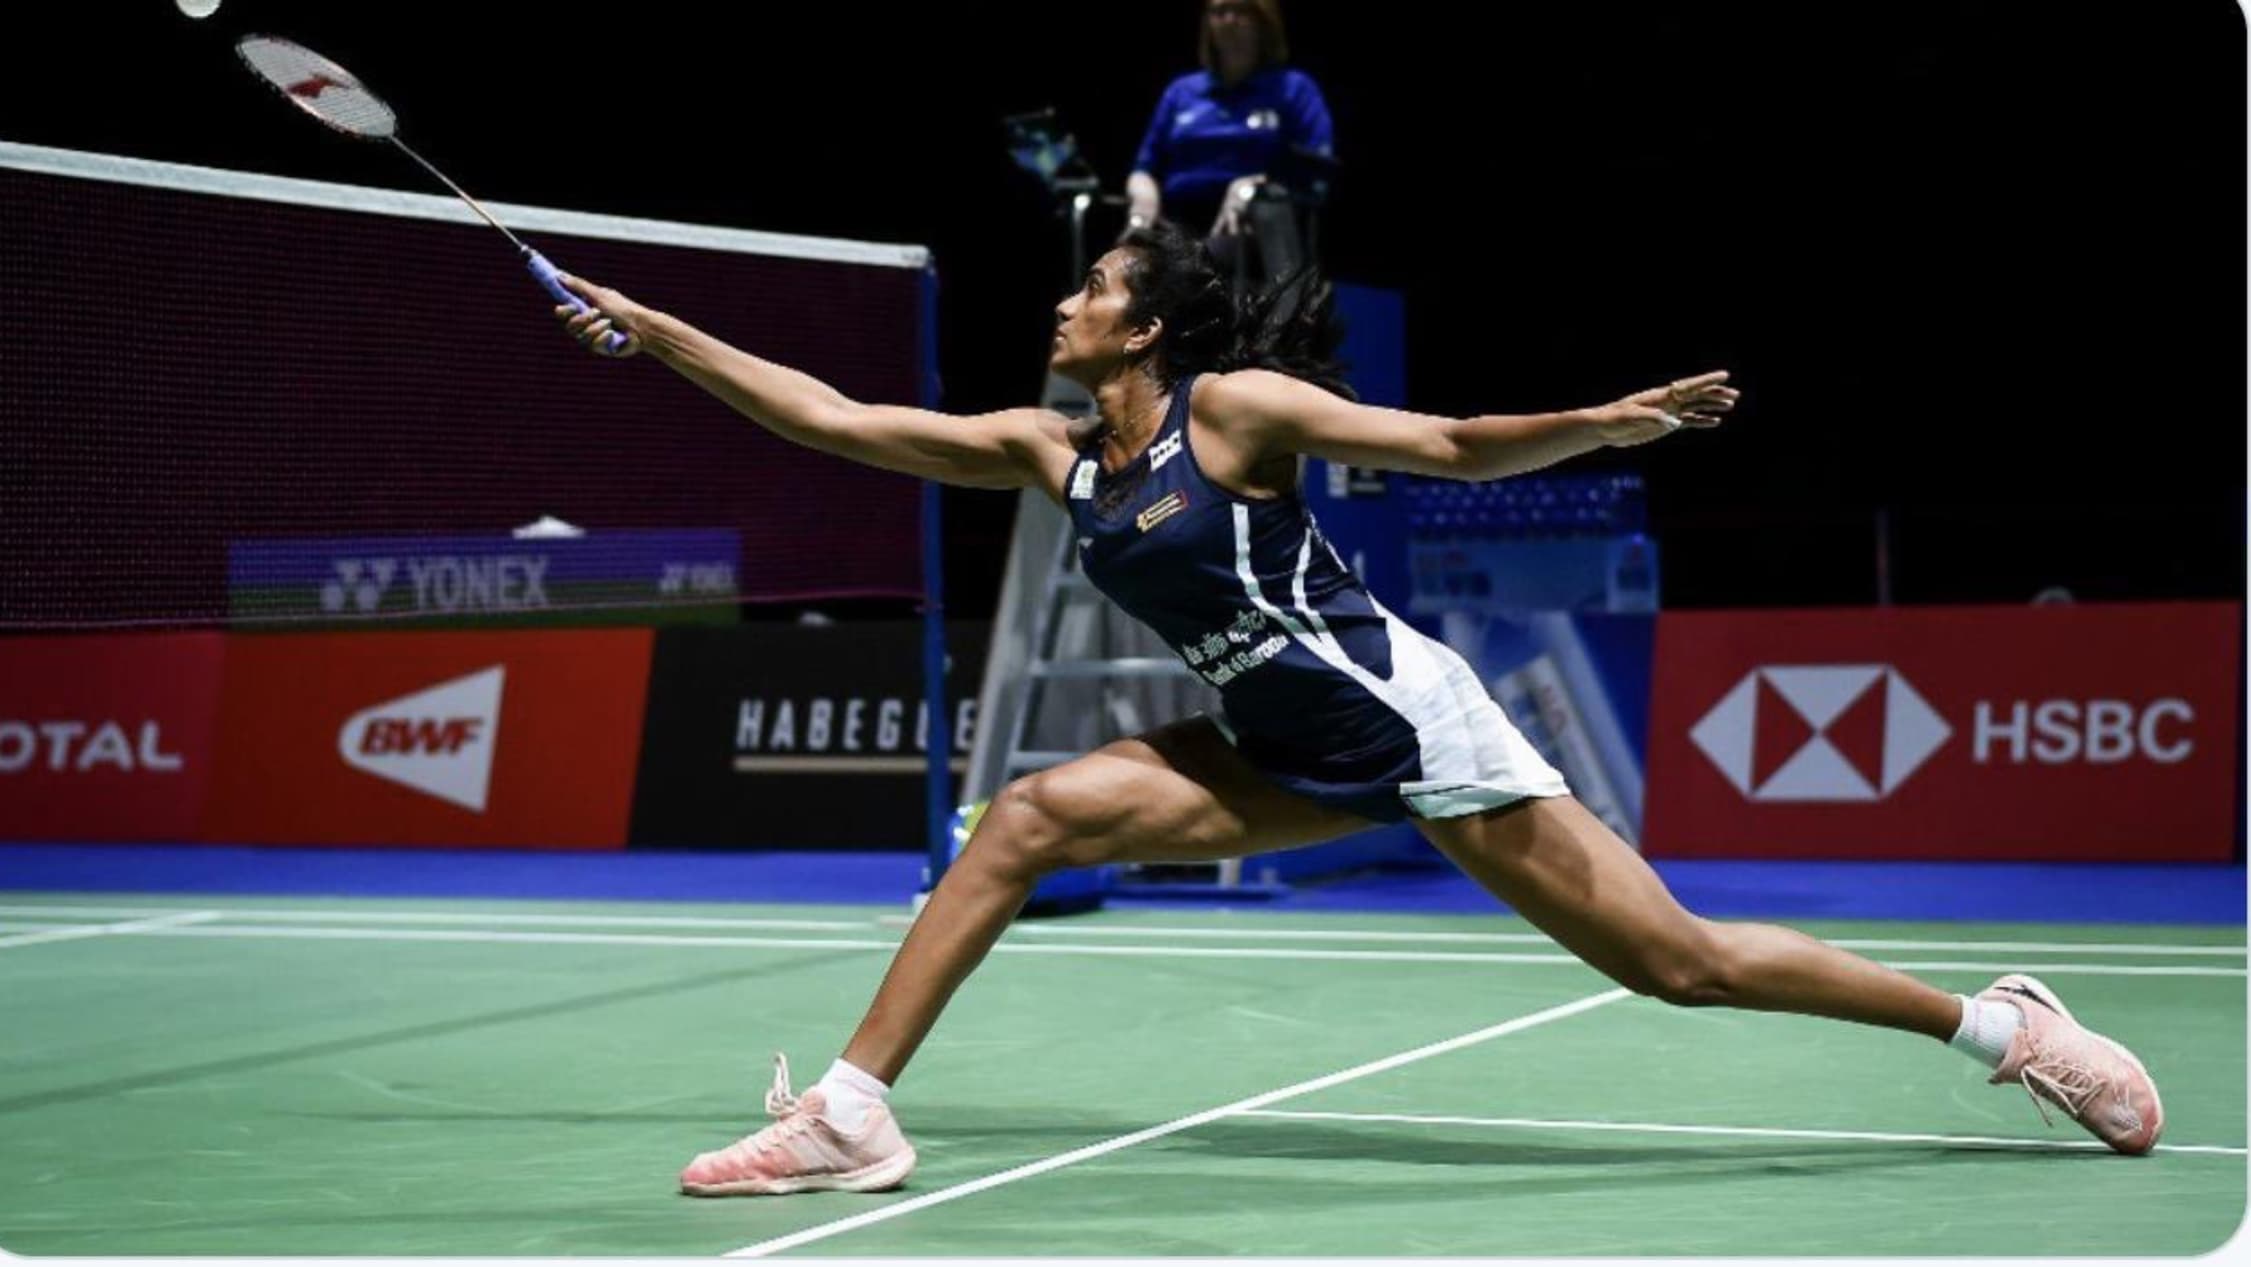 All England Open 2021 badminton Get full schedule, fixtures and know where to watch telecast and live streaming in India